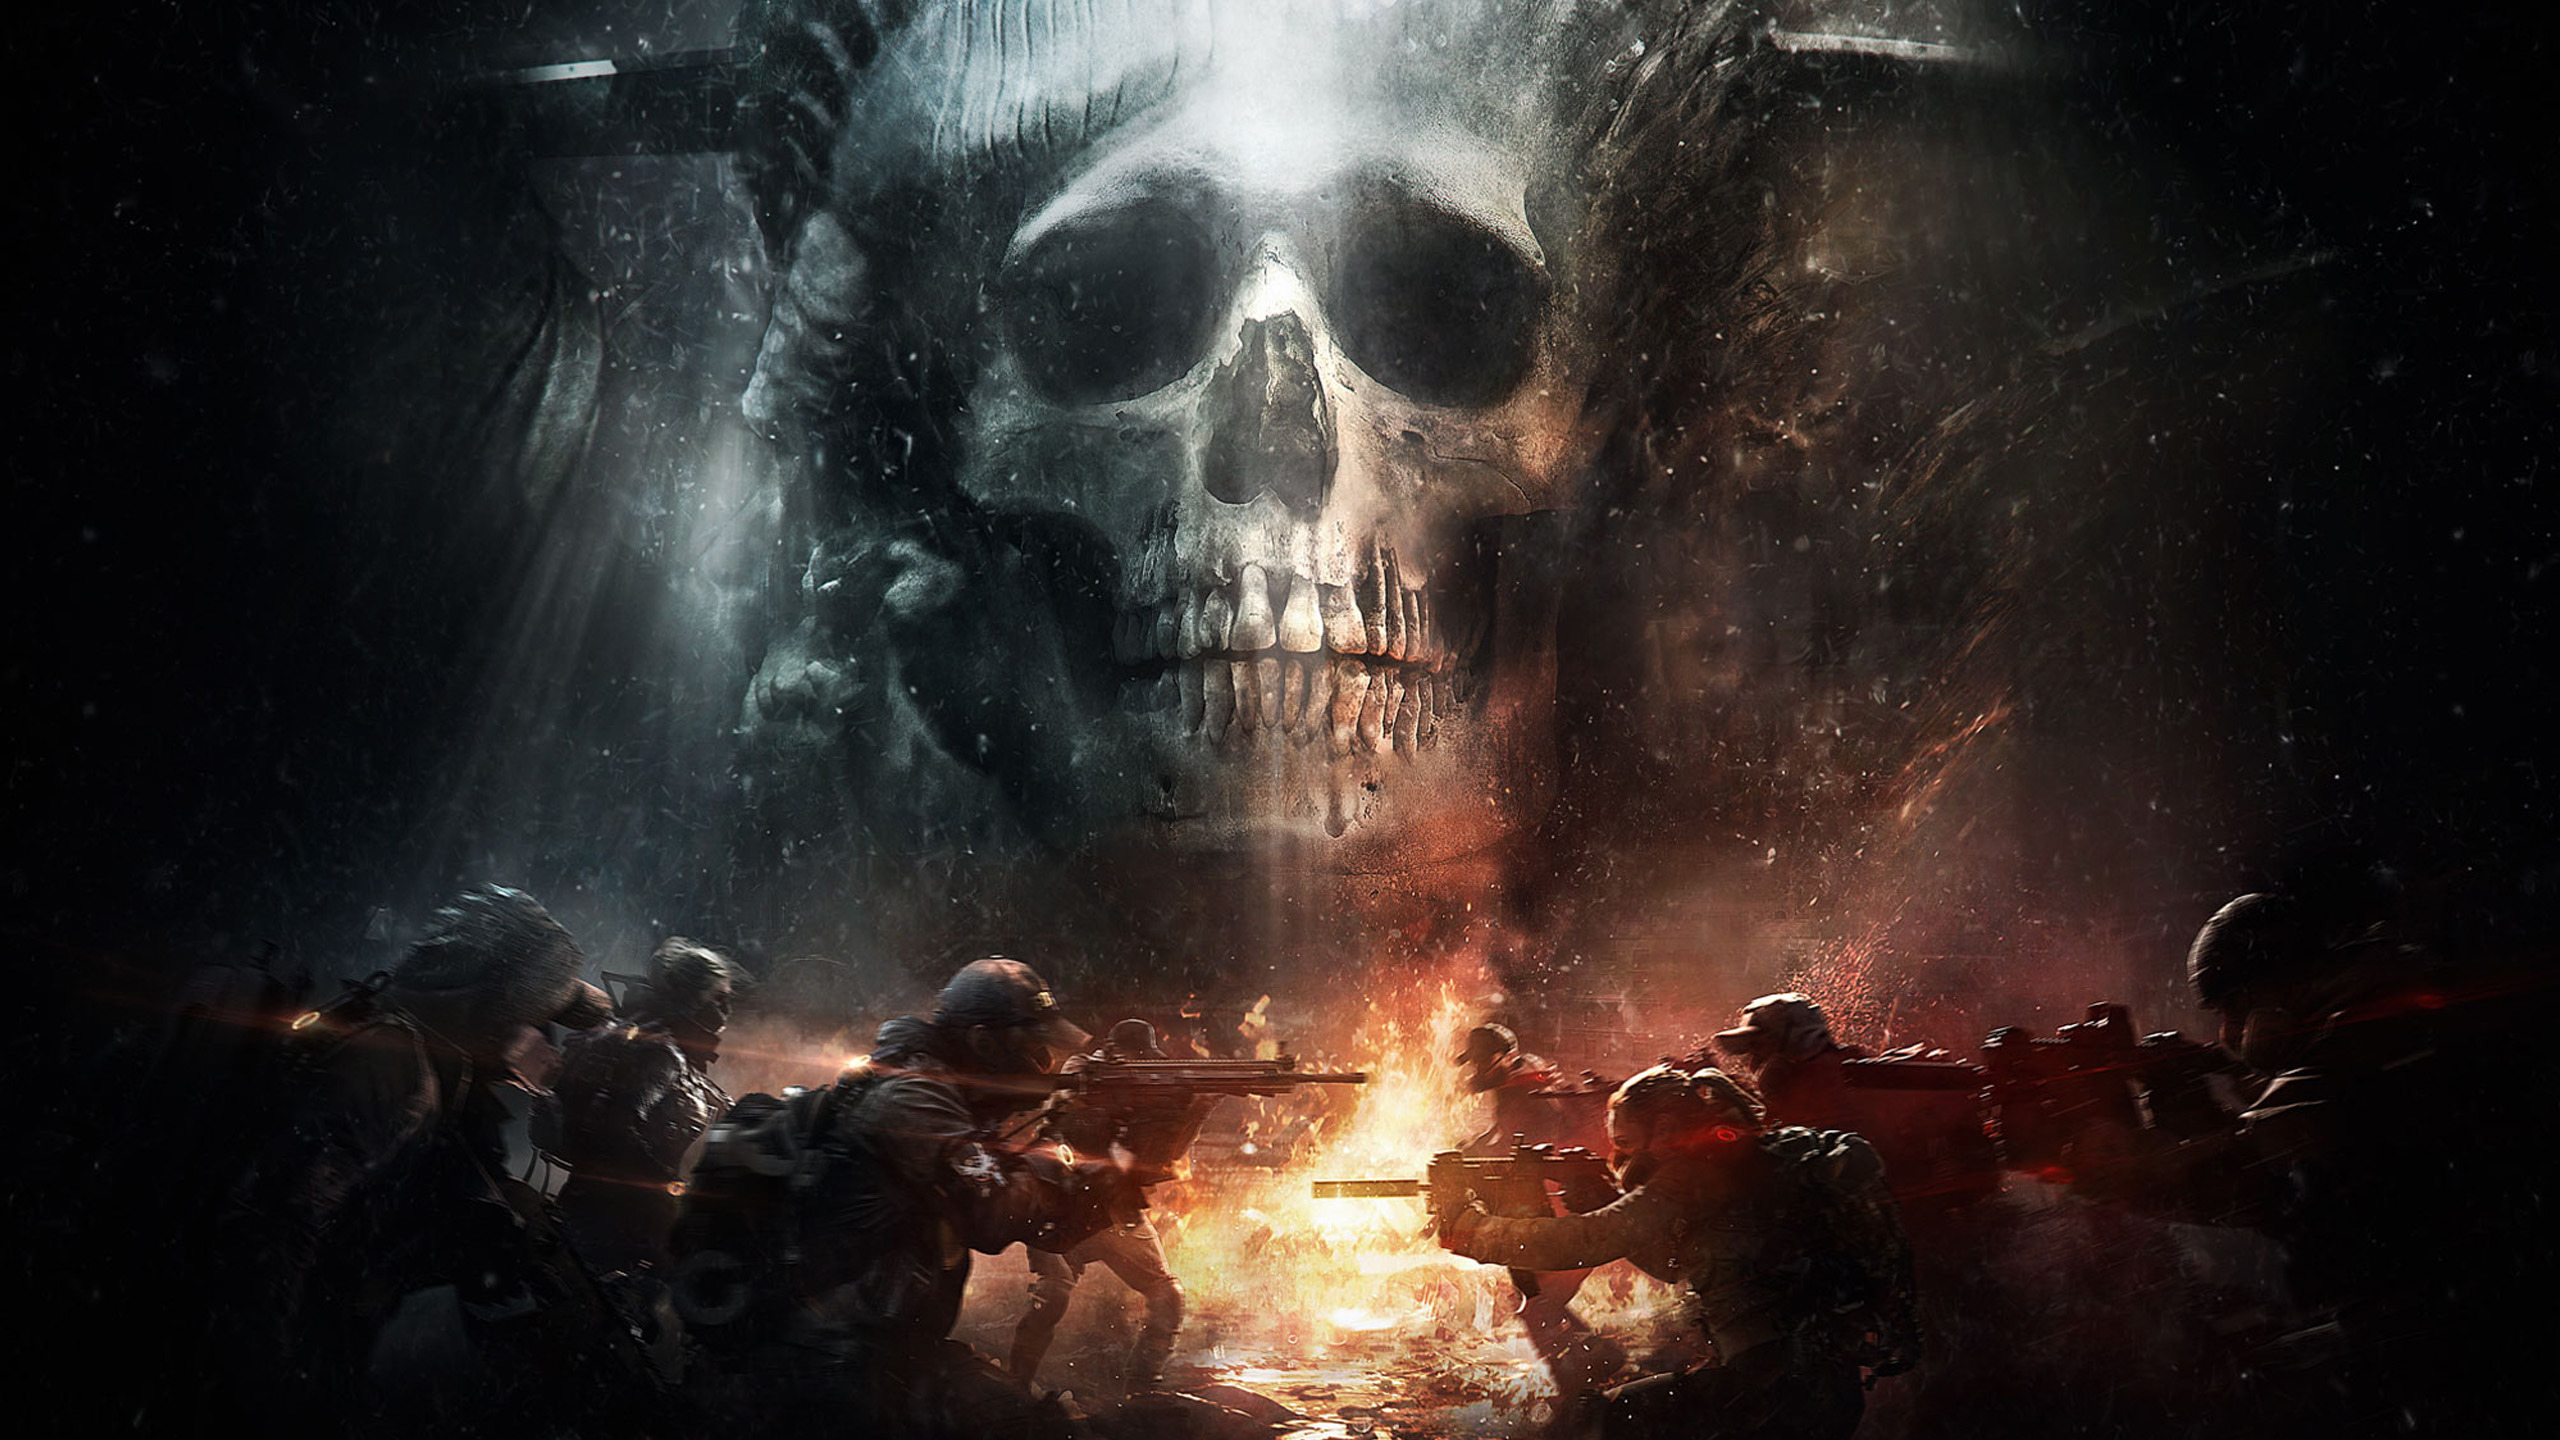 Download 2560x1440 Wallpaper Tom Clancy S The Division Game Skull Soldiers Dual Wide Widescreen 16 9 Widescreen 2560x1440 Hd Image Background 2772